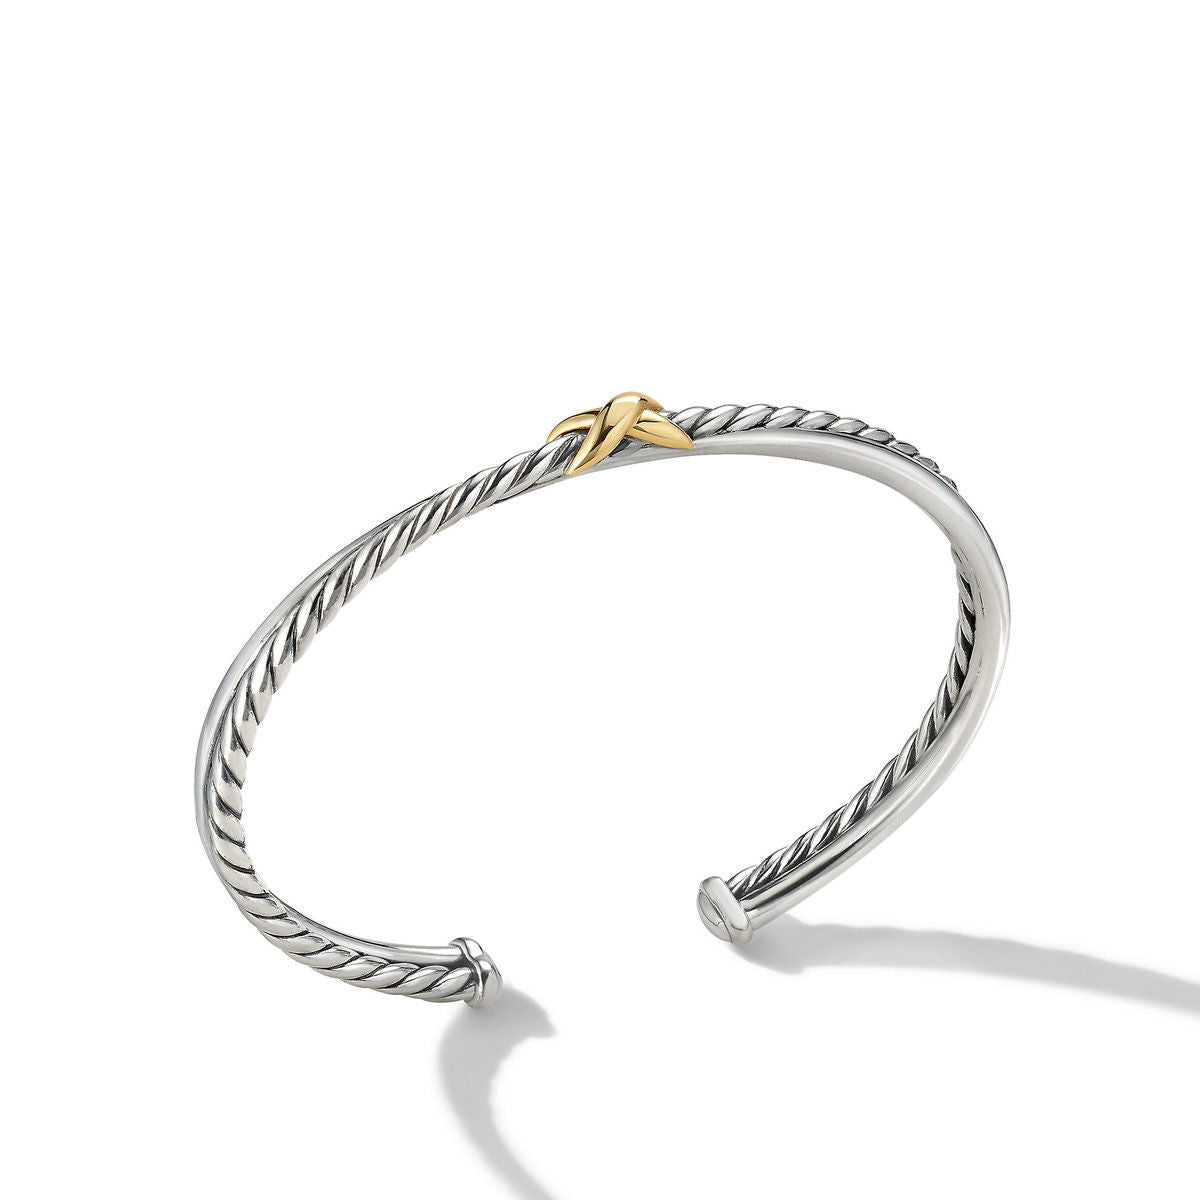 Petite X Center Station Bracelet with 18K Yellow Gold